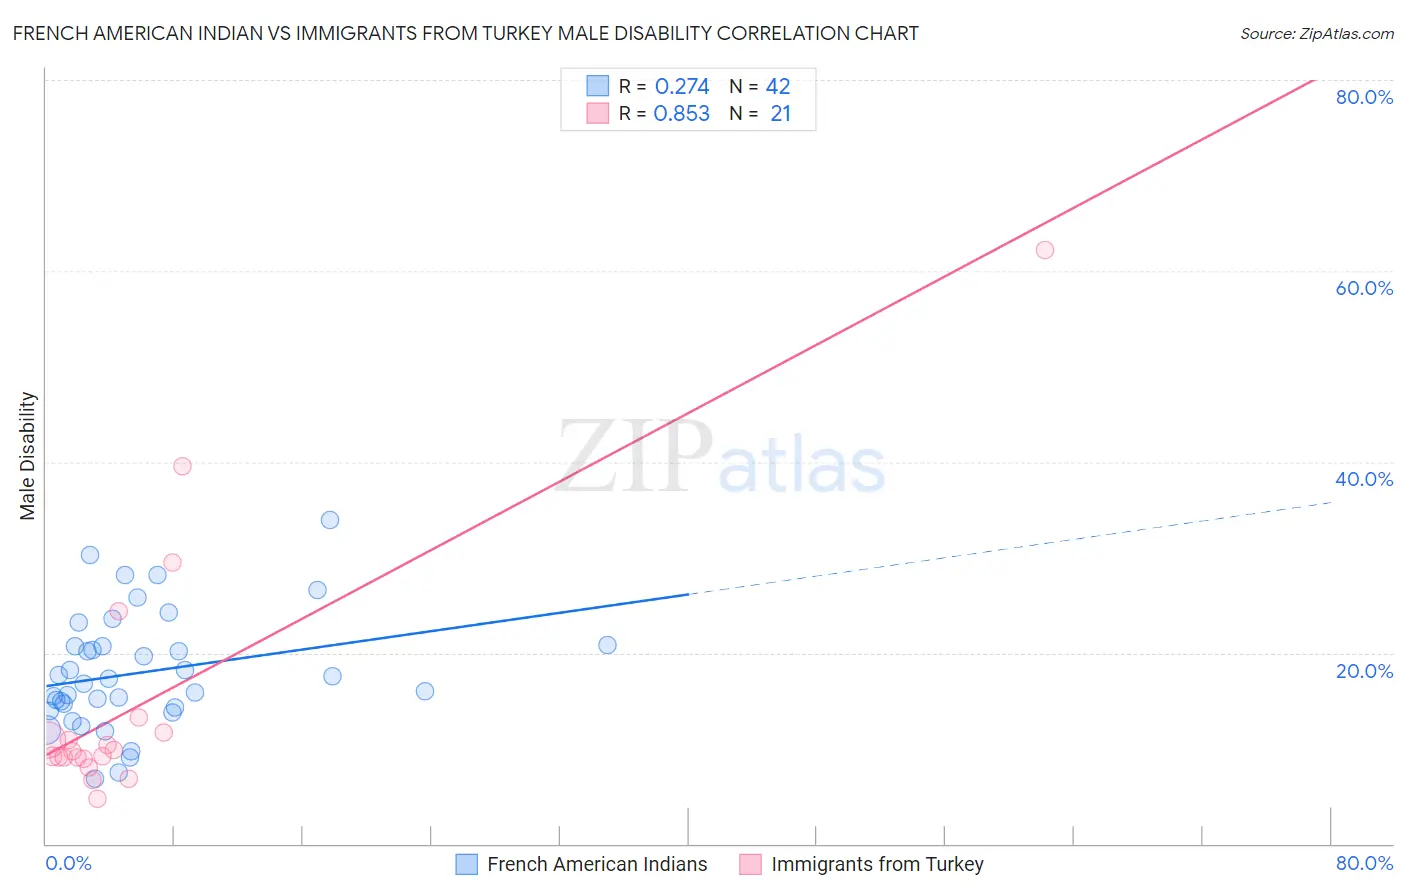 French American Indian vs Immigrants from Turkey Male Disability